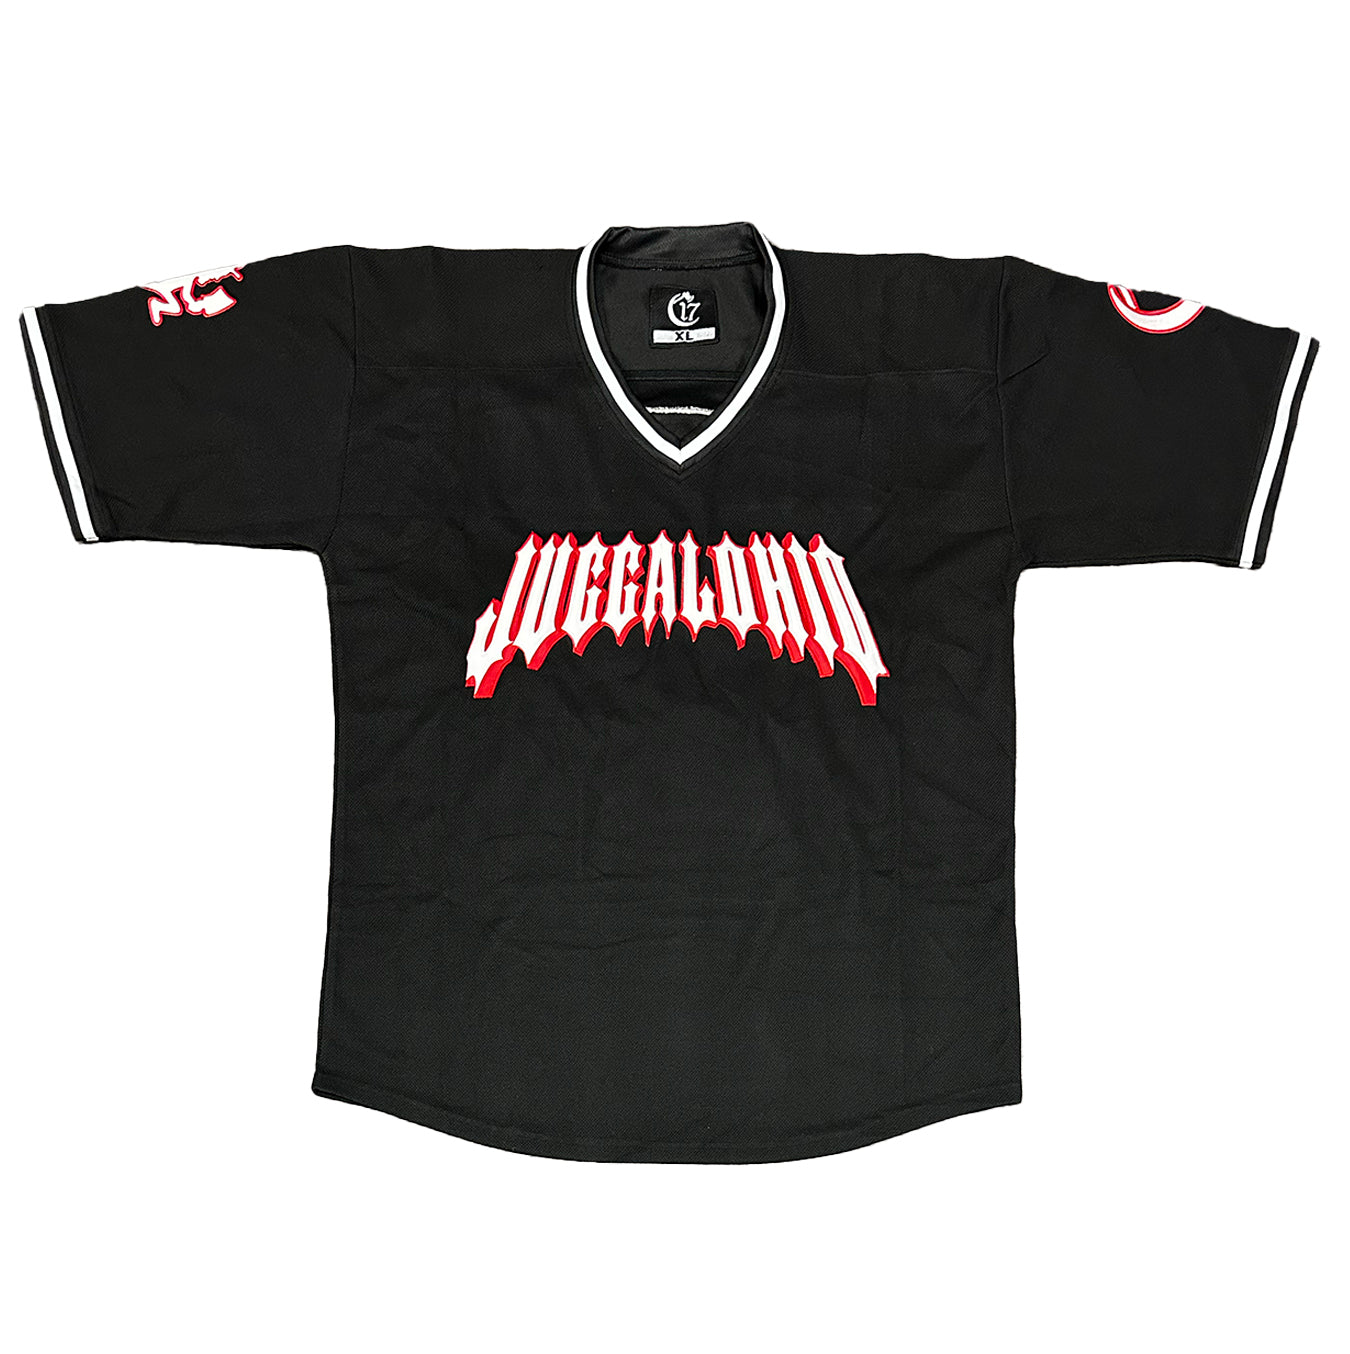 Juggalohio official event Jersey - Black